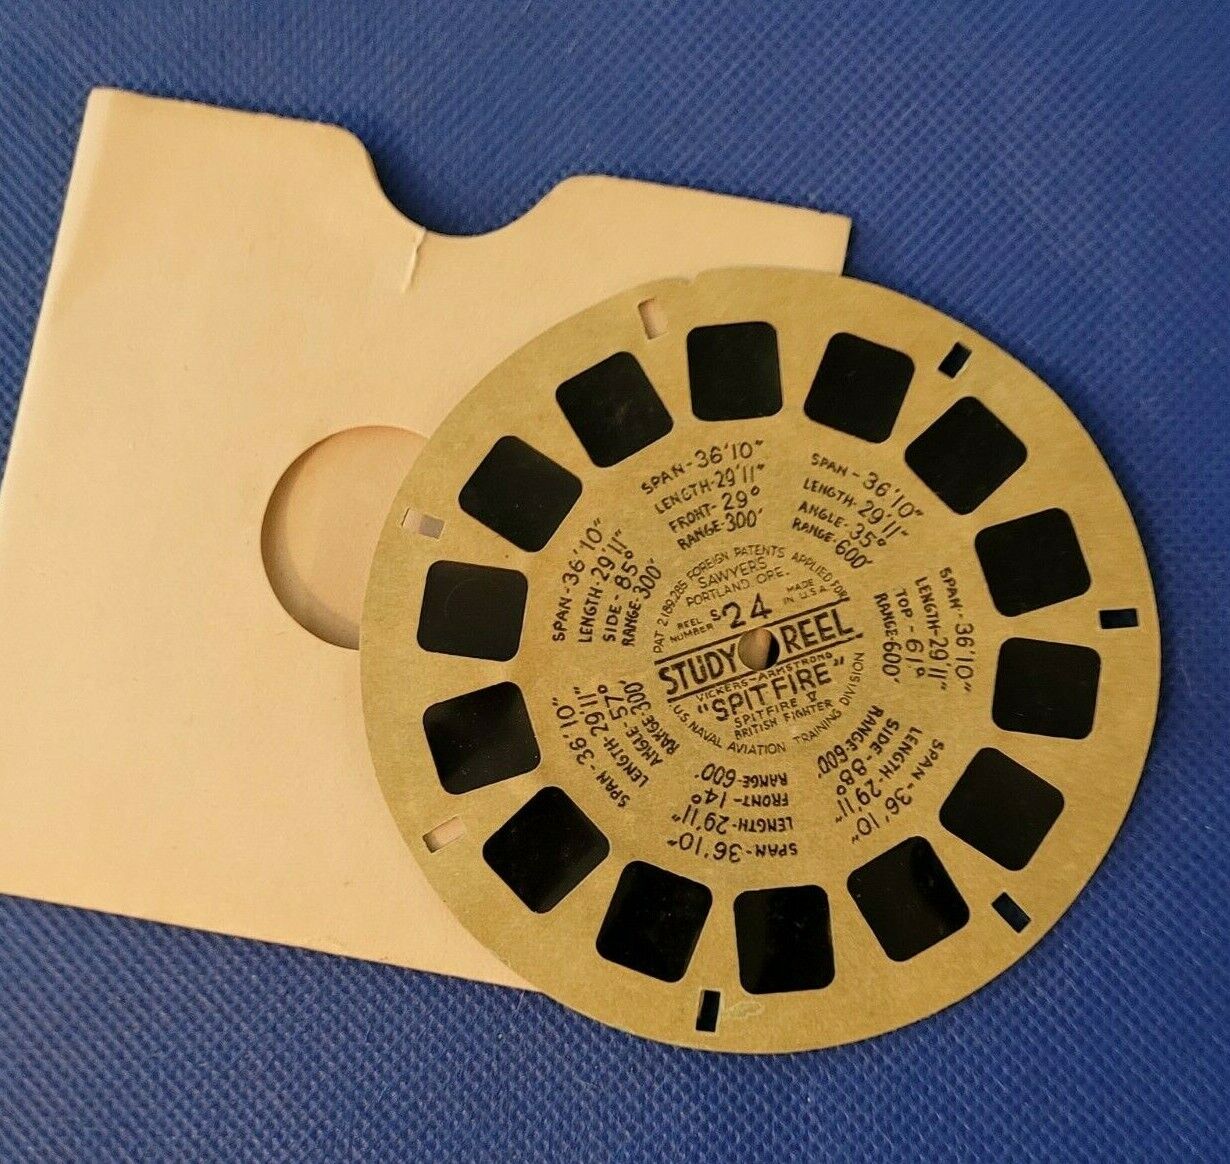 view-master Reel USN Navy Training Study S24 Vickers-Armstrong Spitfire Range E